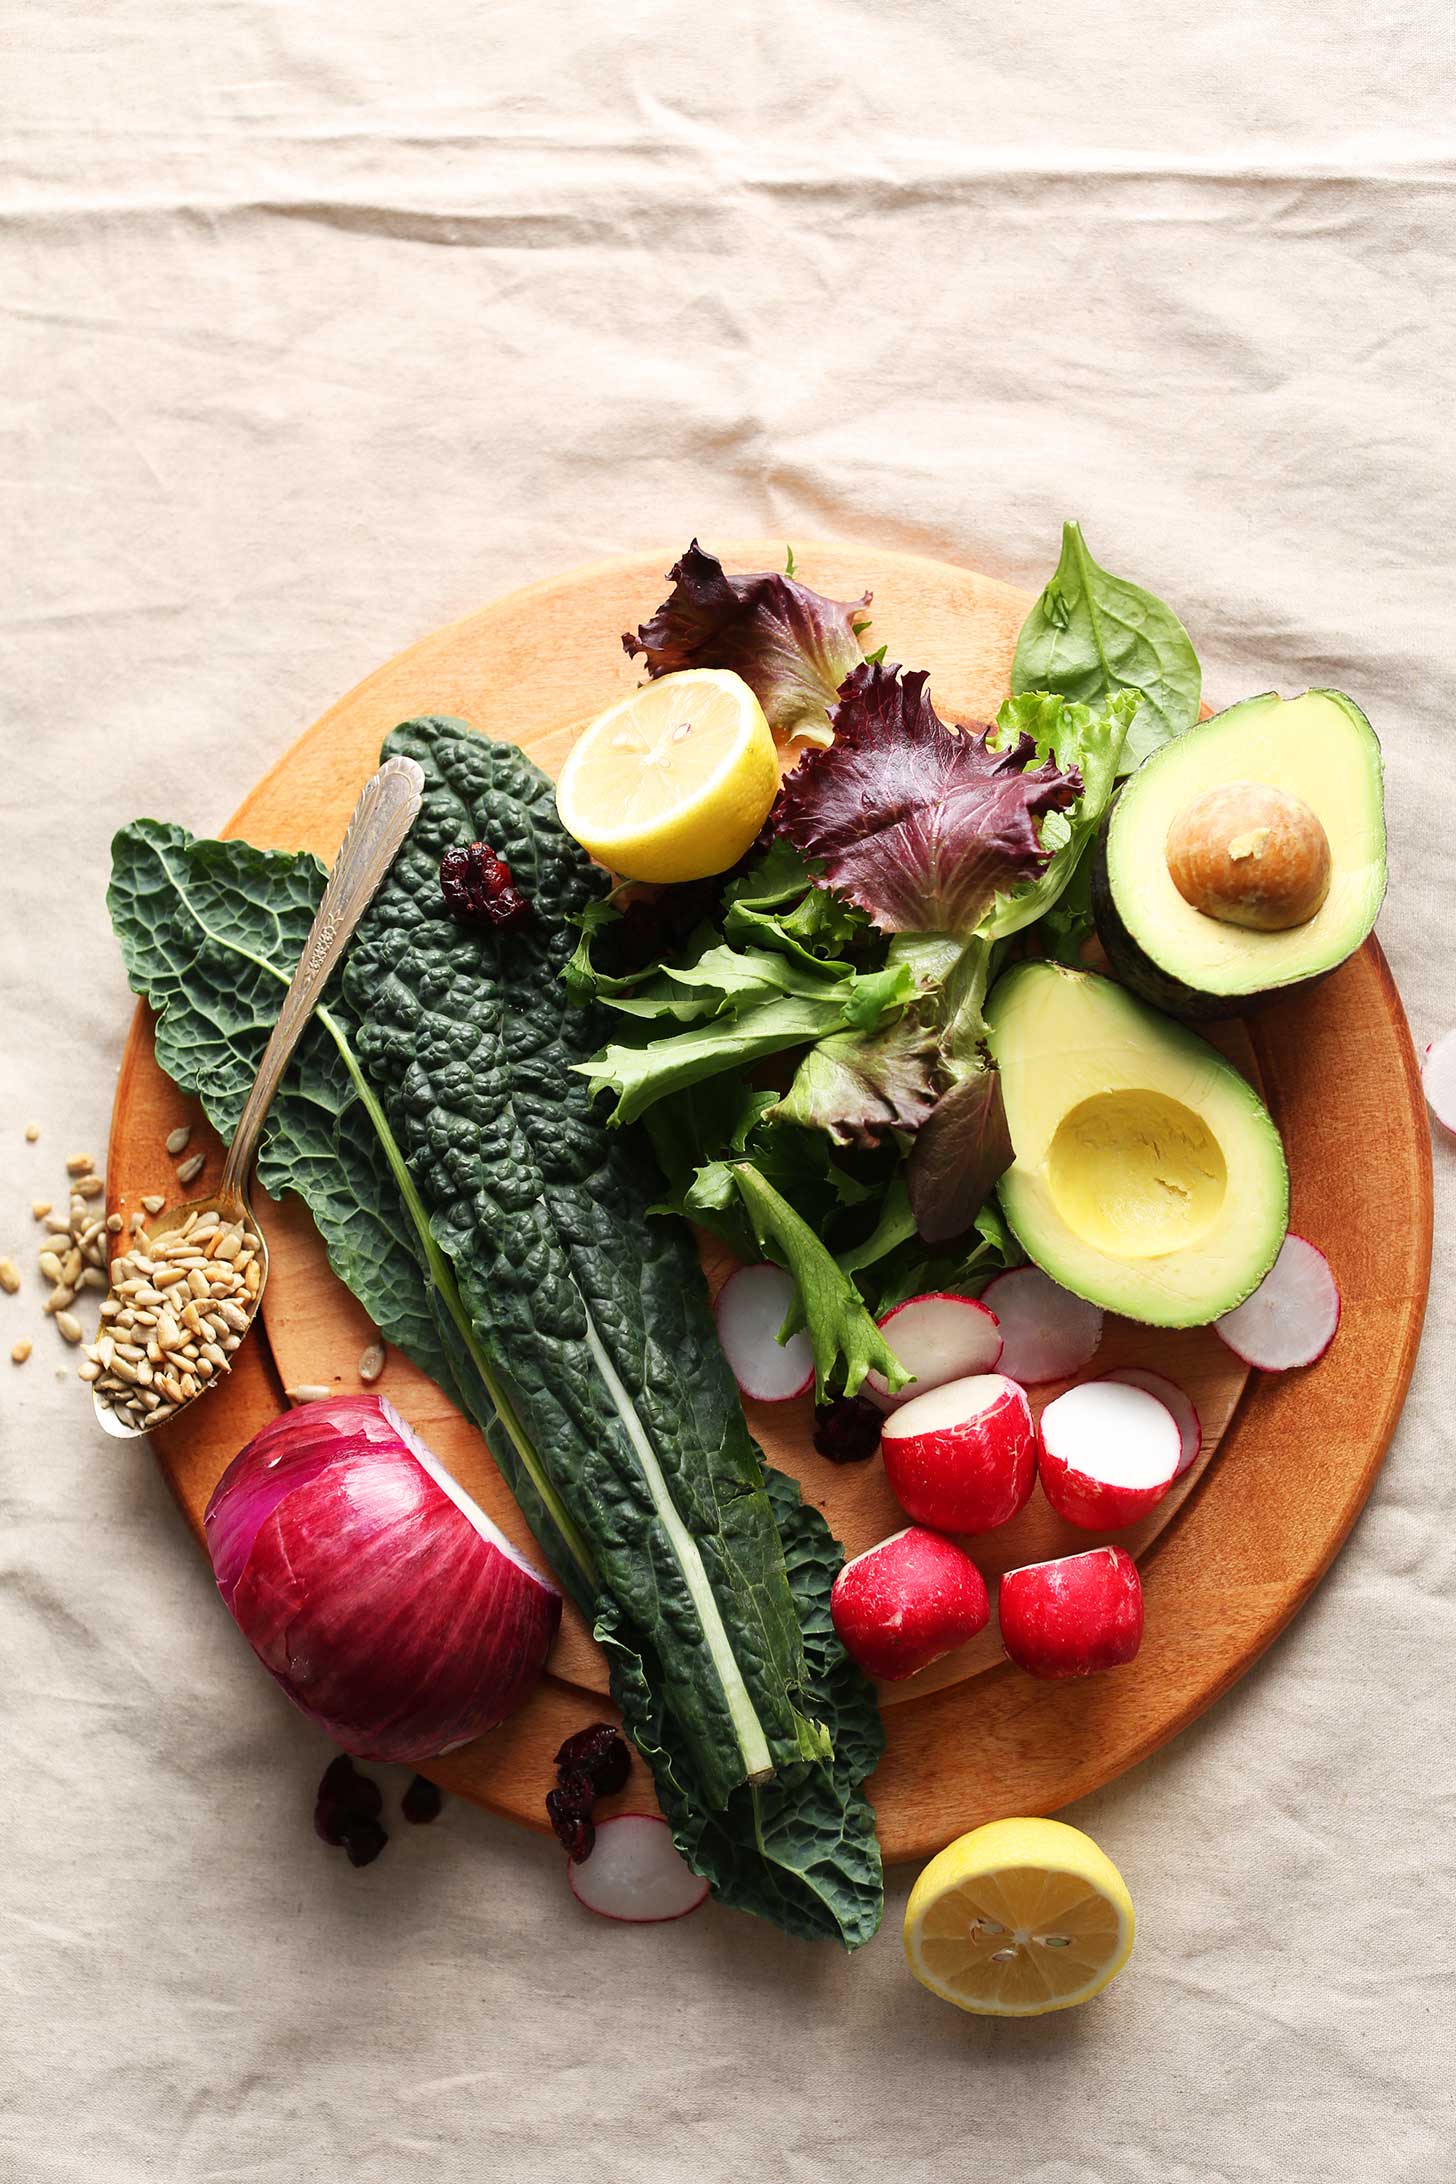 Wood cutting board featuring kale, red onion, radishes, avocado, lemon, sunflower seeds, cranberries, and greens for a delicious plant-based salad recipe